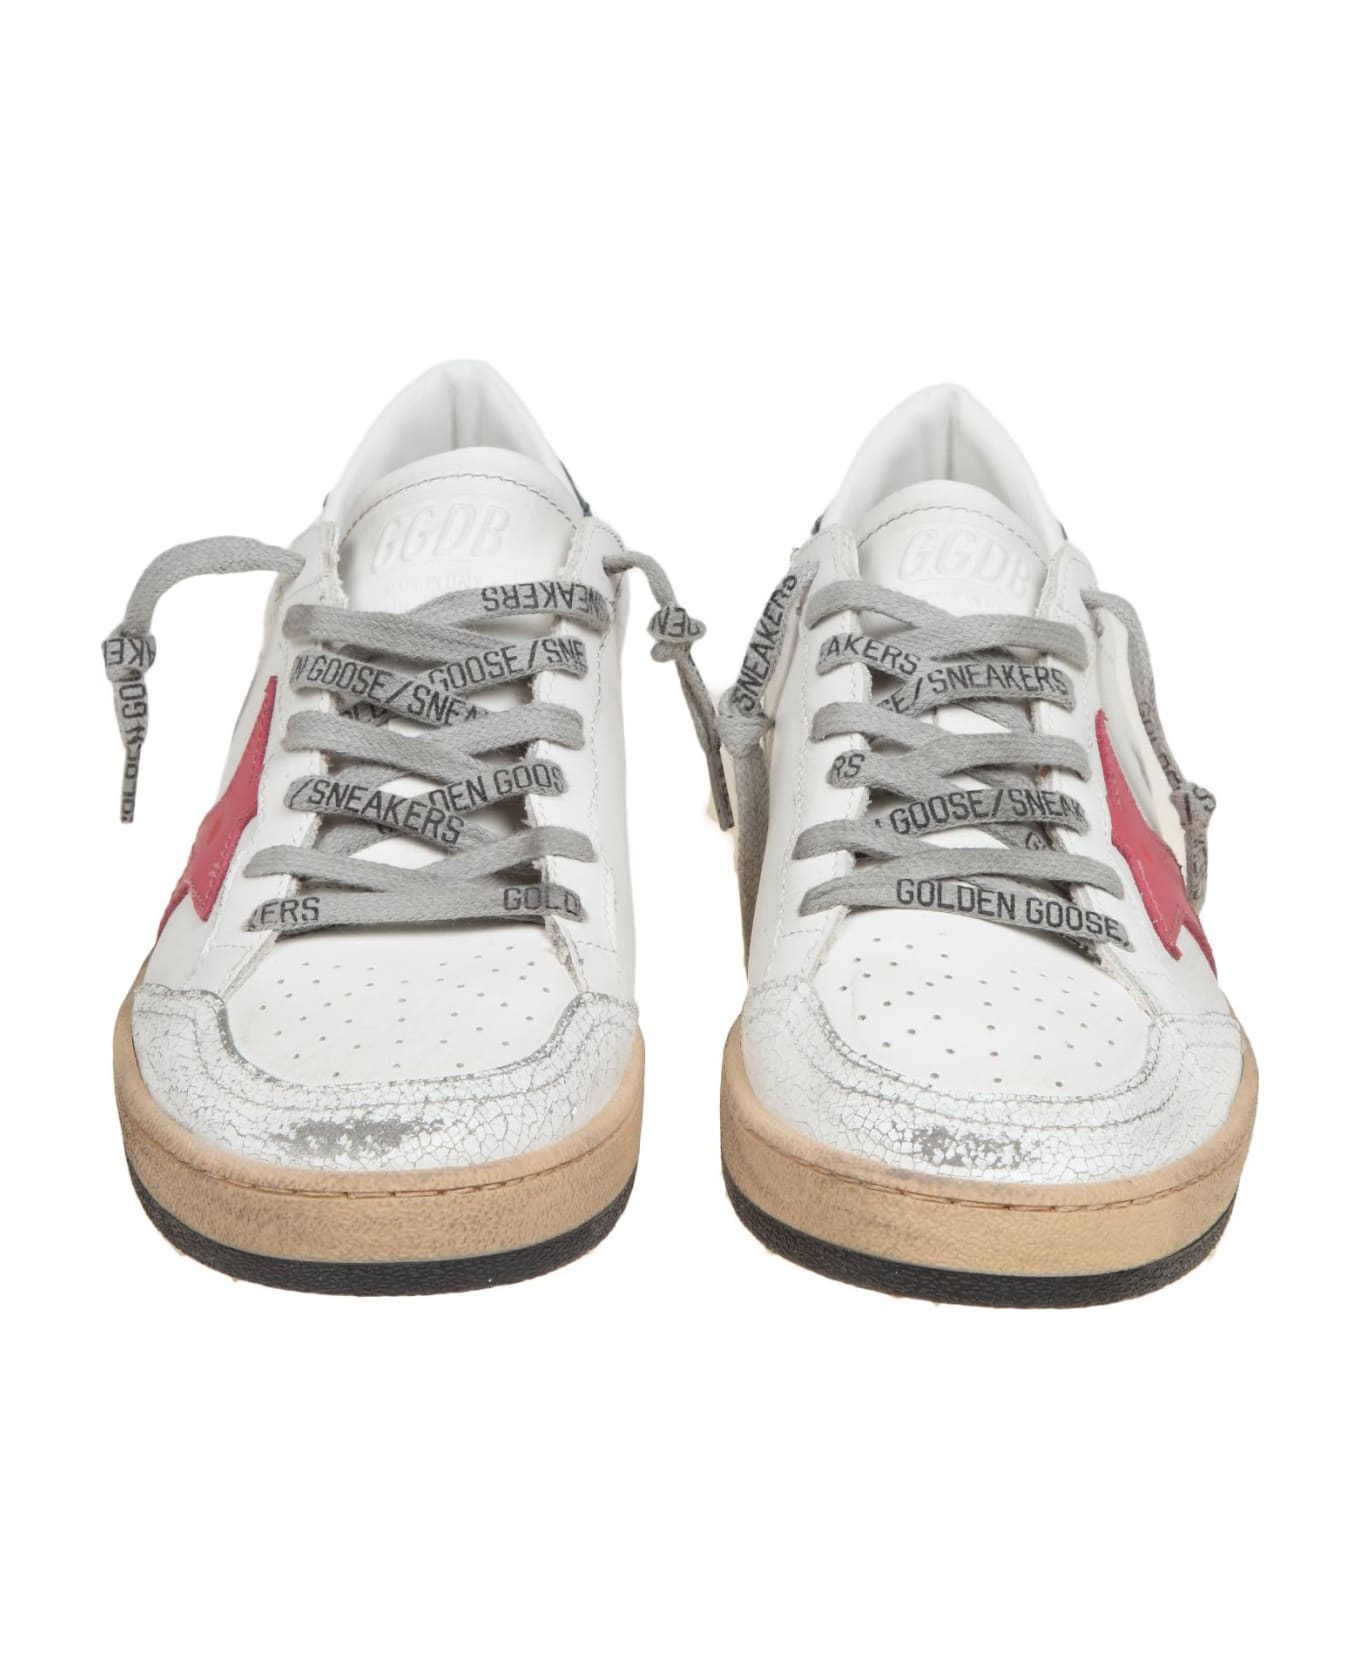 Golden Goose Ballstar In White And Pink Leather - White/red